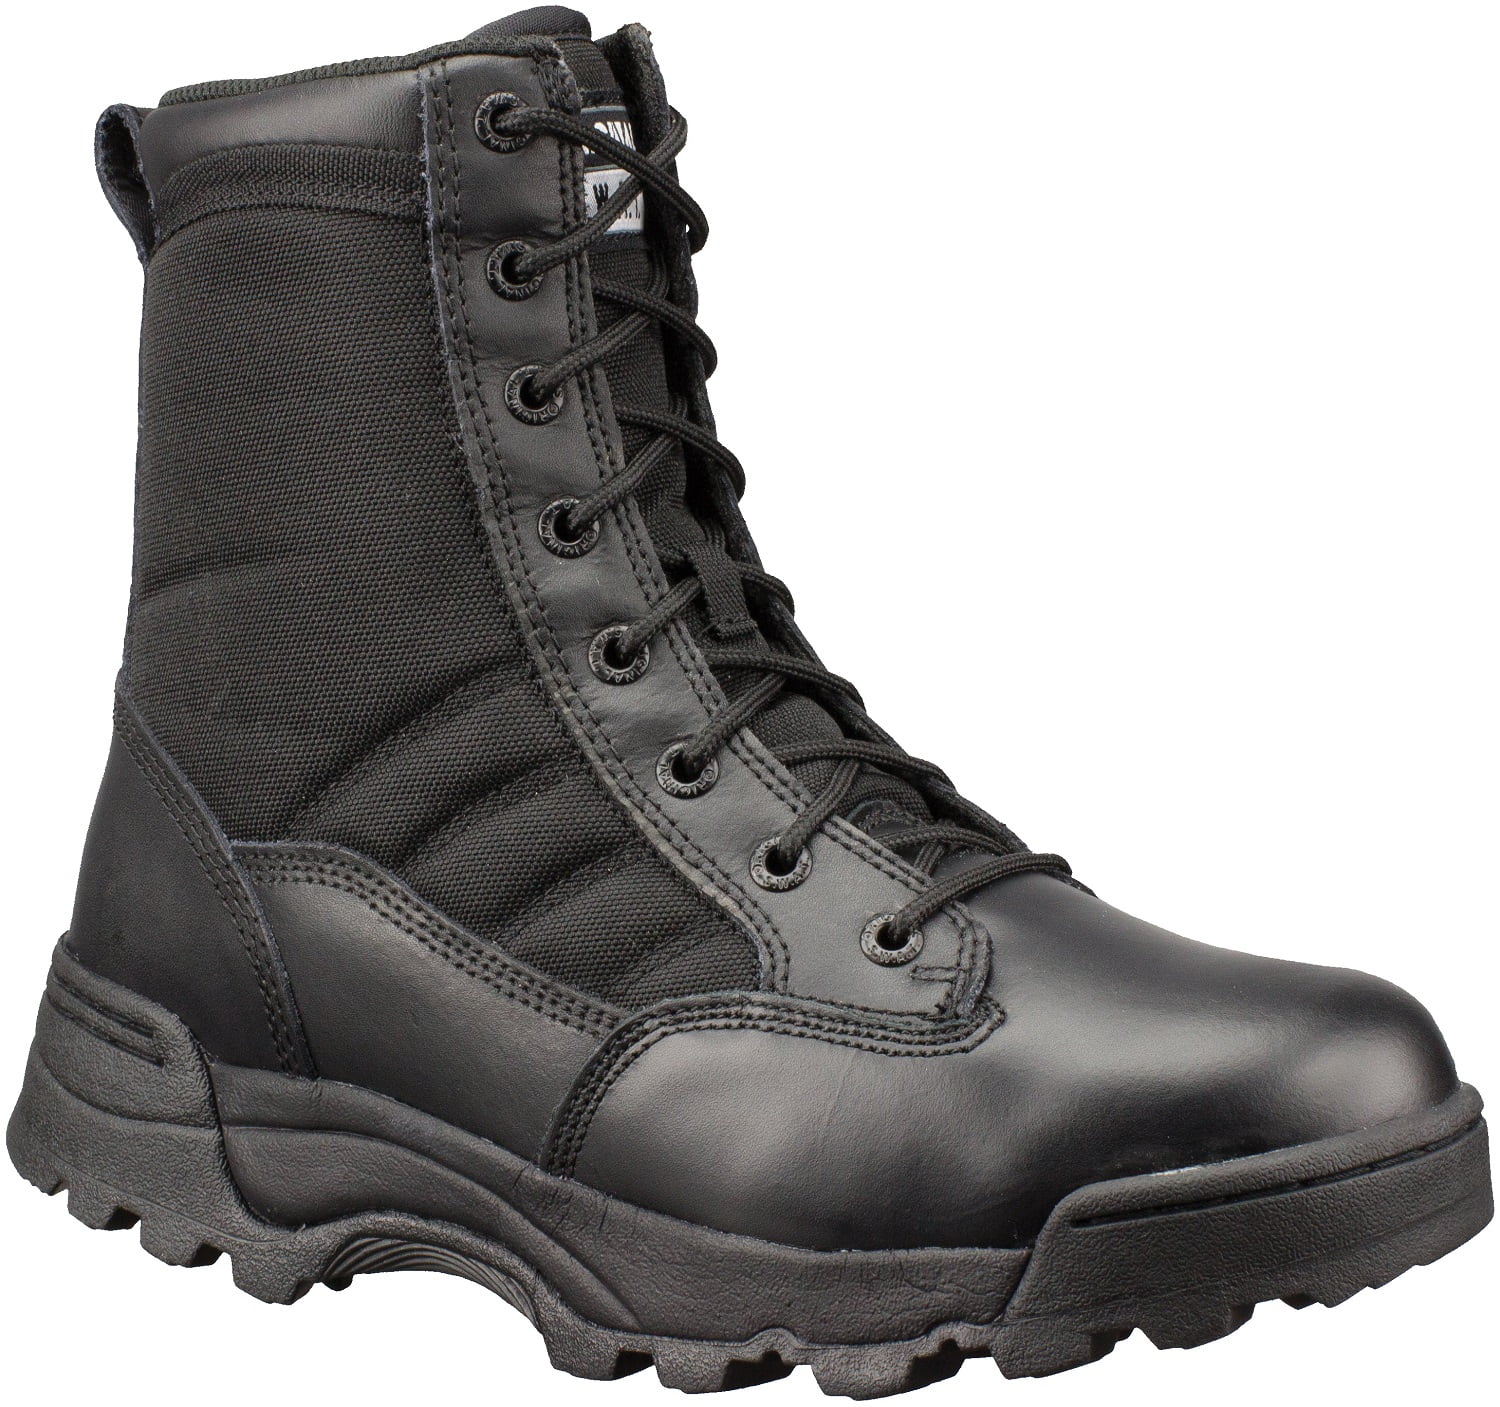 Details about   Mens Steel Toe Army Work Boots Safety Shoes Durable Cushion Casual Sneaker Sport 